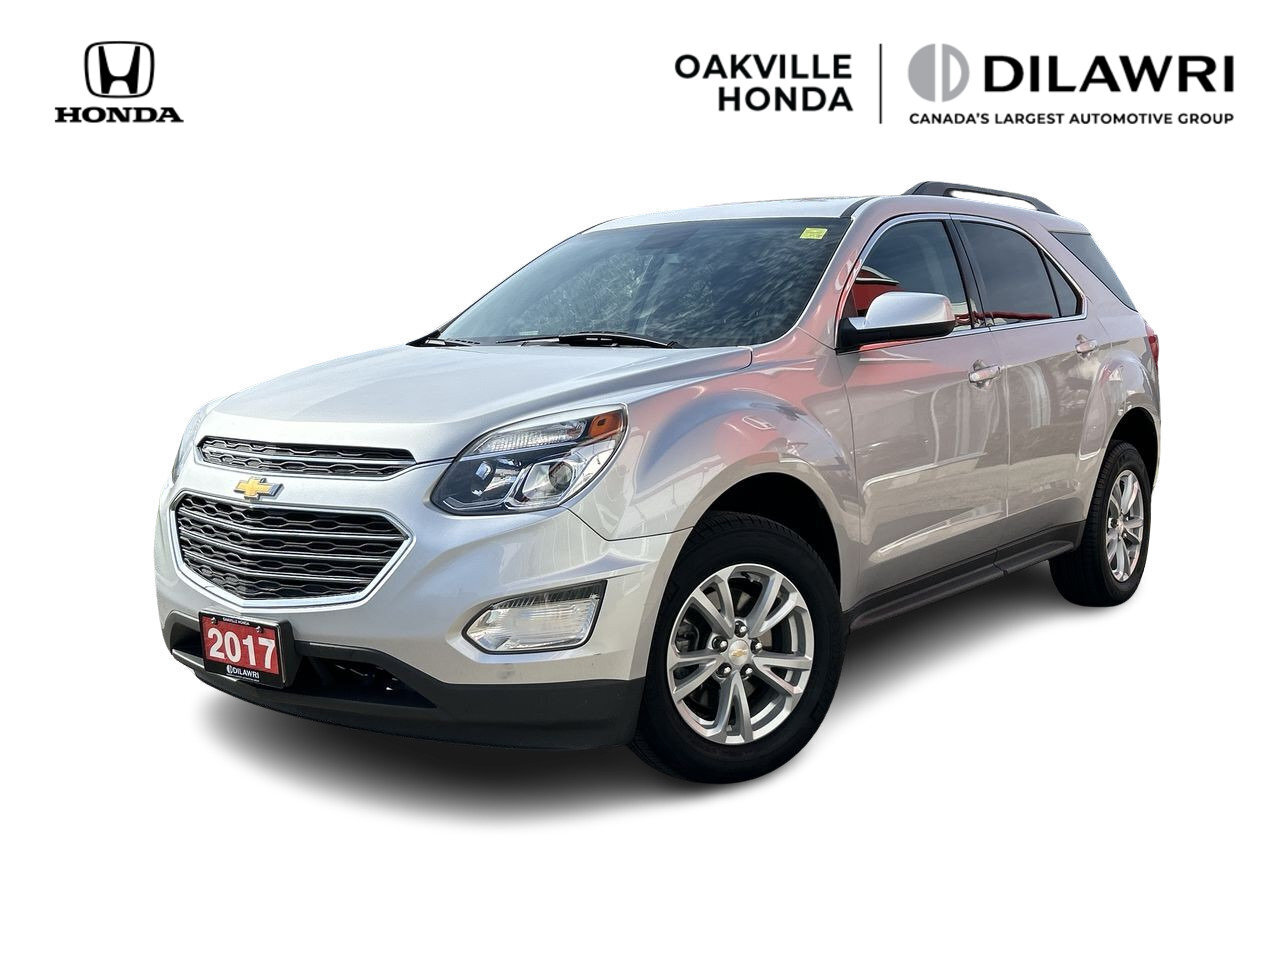 2017 Chevrolet Equinox AWD LT Clean Carfax | One Owner | Power Seats / 